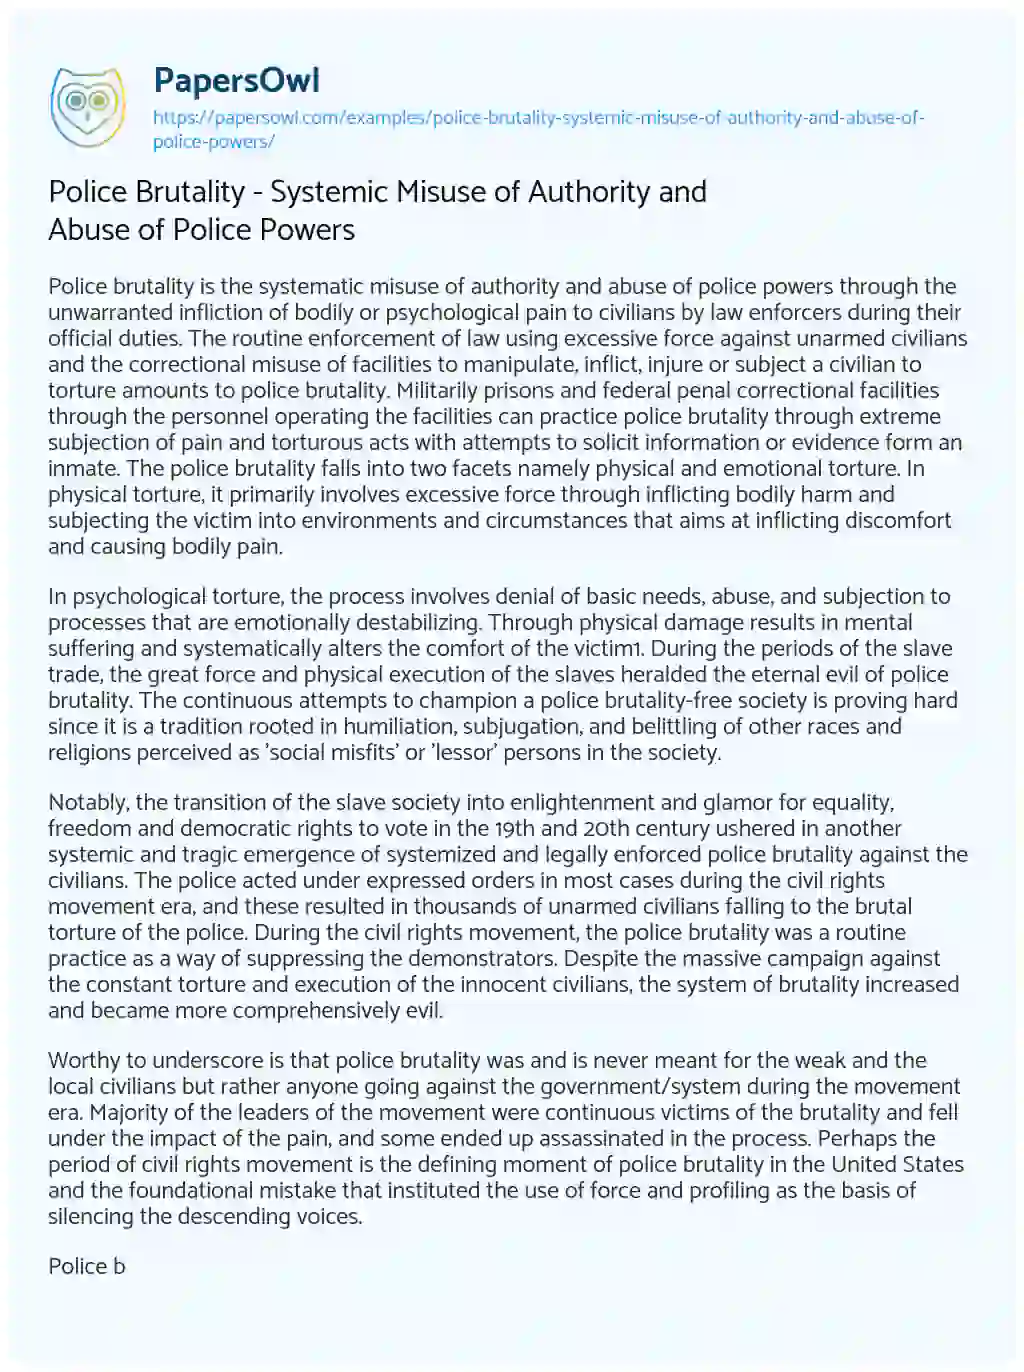 Essay on Police Brutality – Systemic Misuse of Authority and Abuse of Police Powers